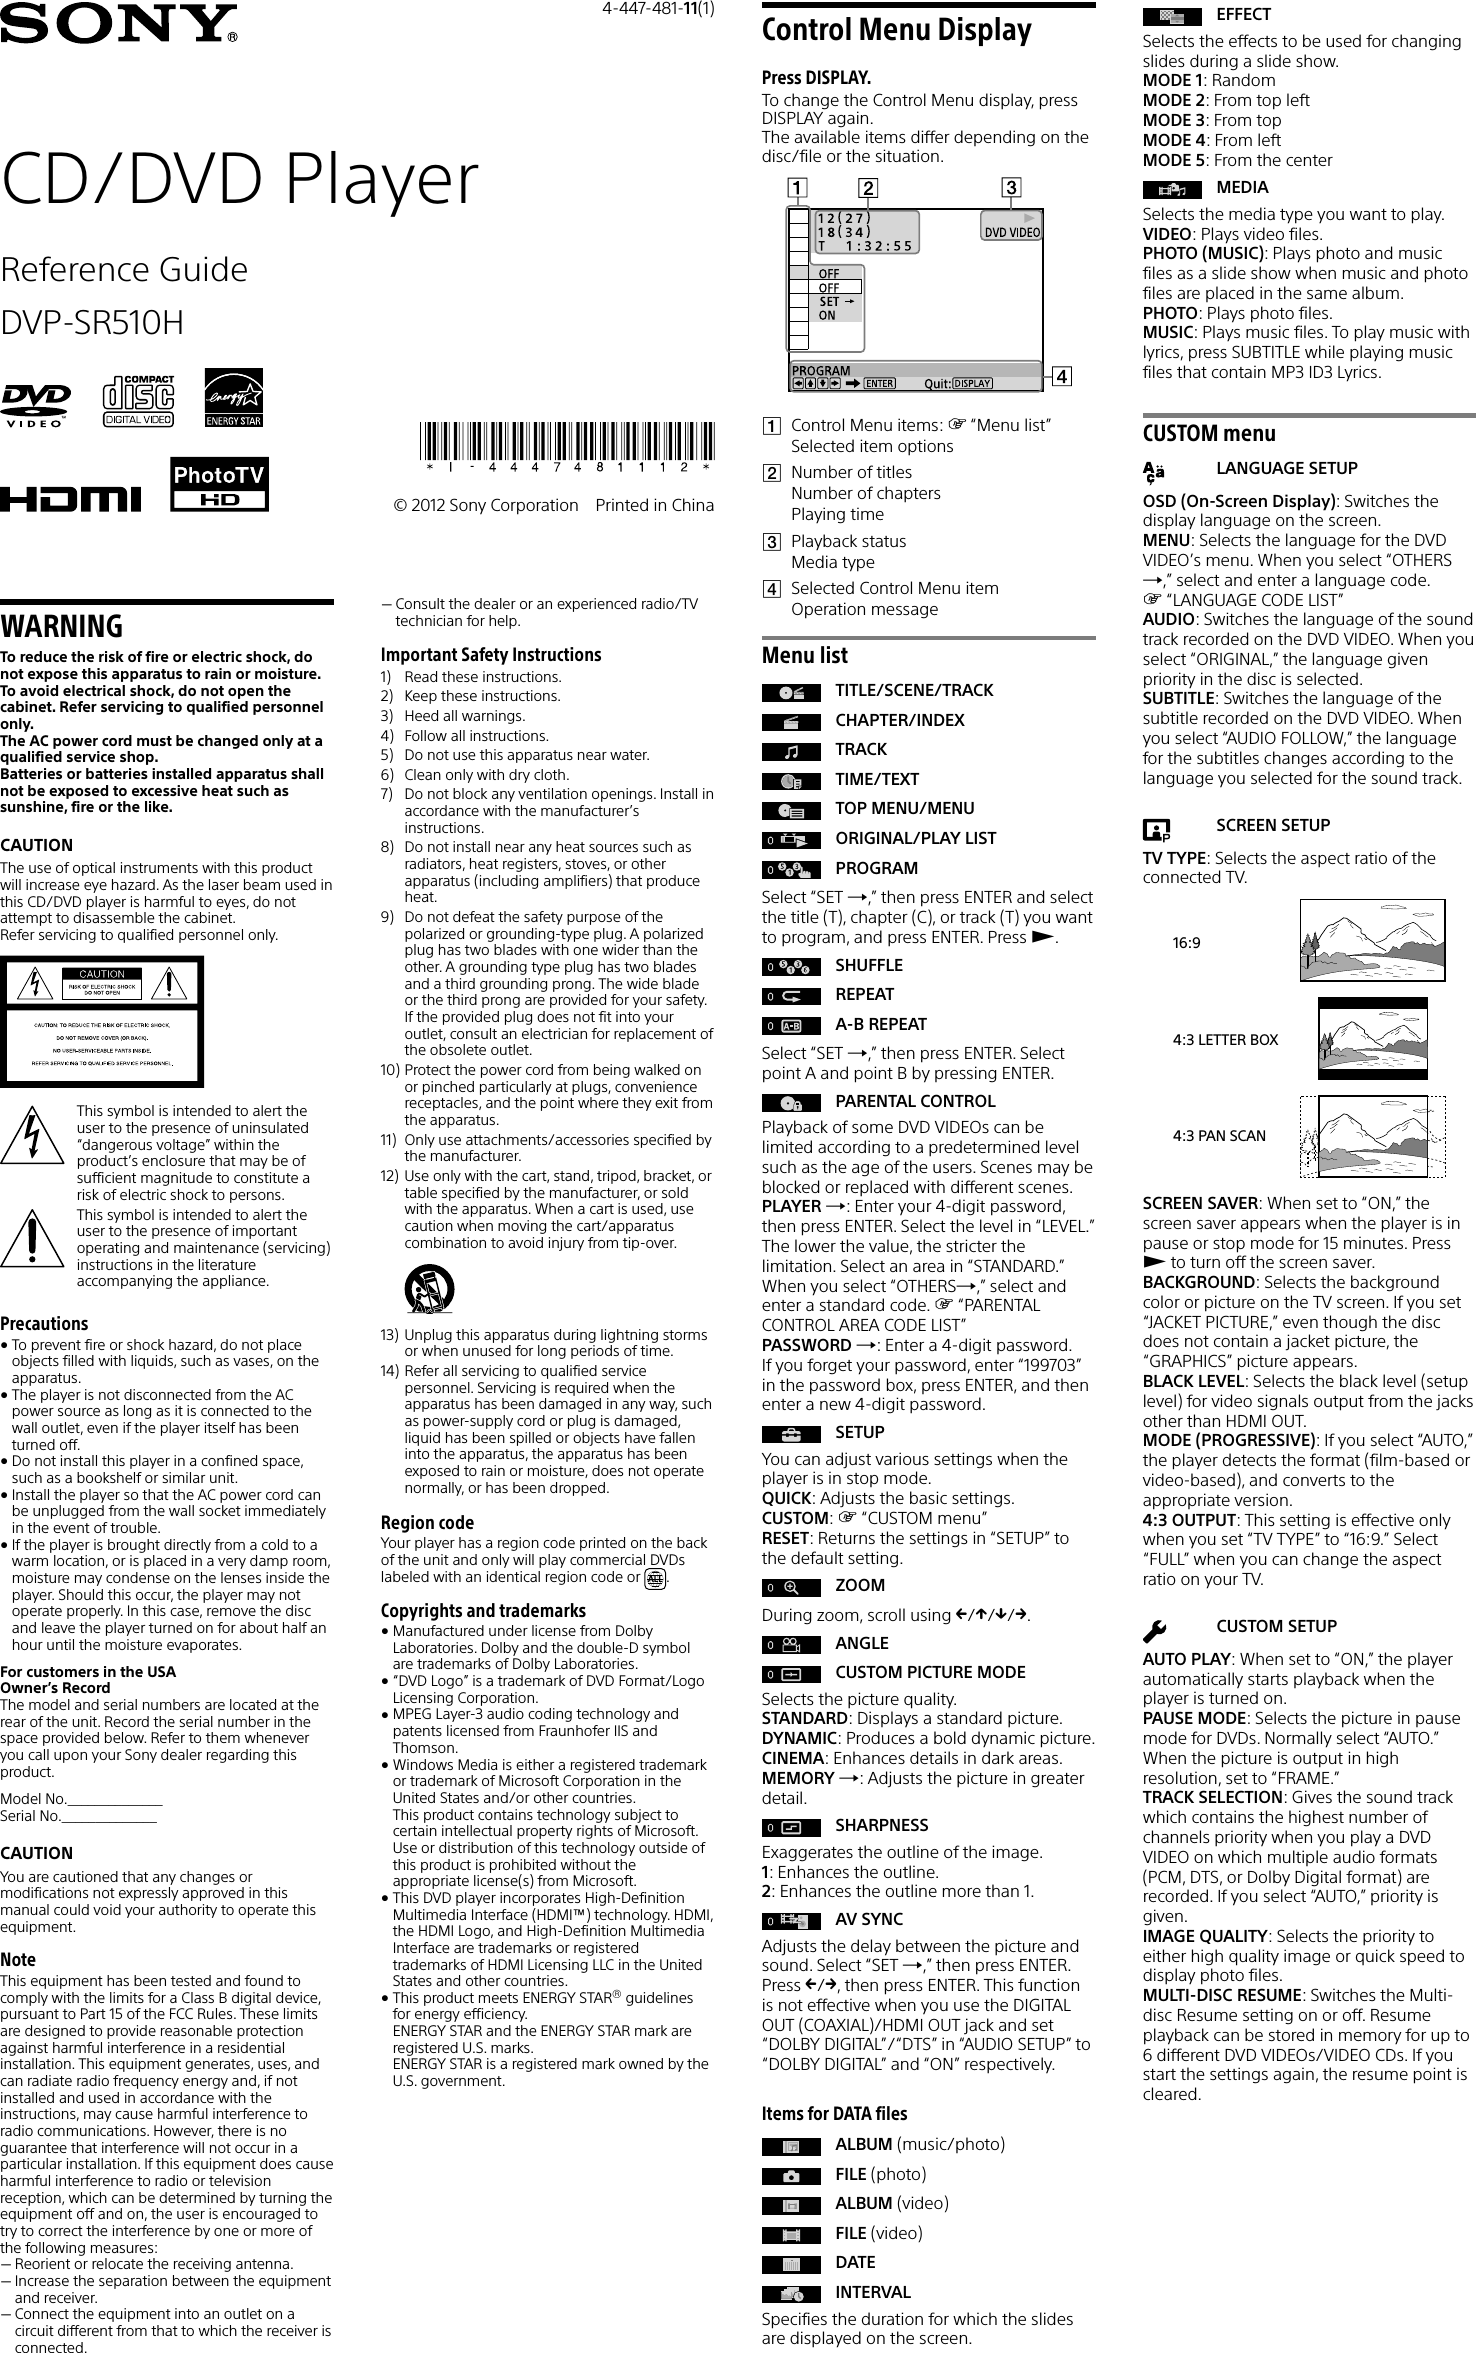 Page 1 of 2 - Sony DVP-SR510H User Manual Reference Guide DVPSR510H Refguide